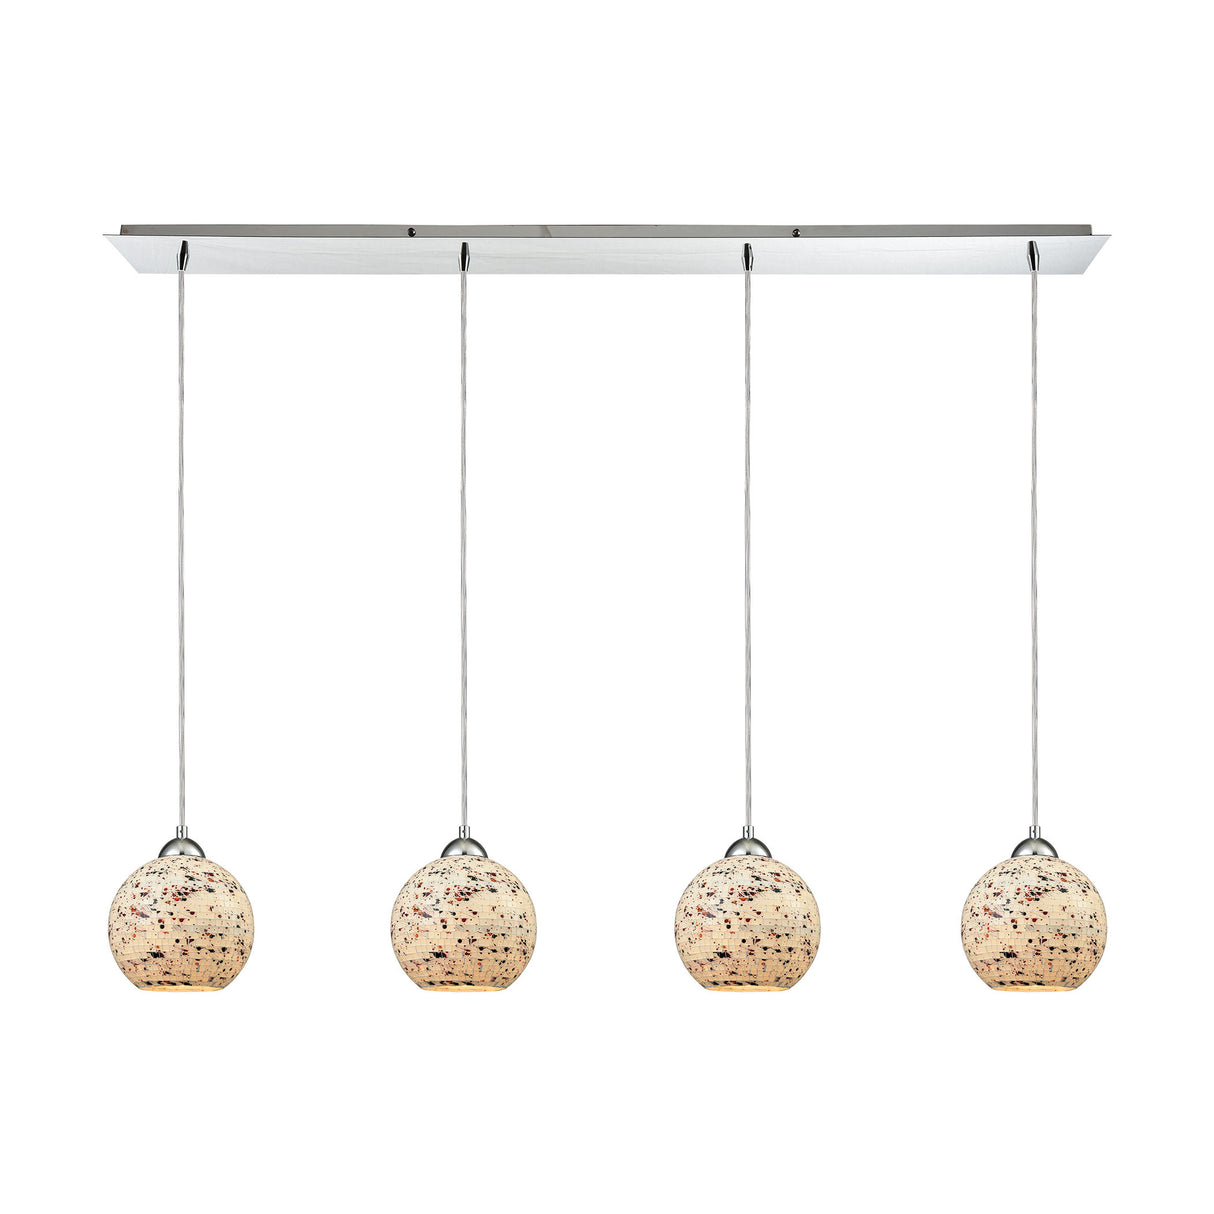 Elk 10741/4LP Spatter 4-Light Linear Pendant Fixture in Polished Chrome with Spatter Mosaic Glass